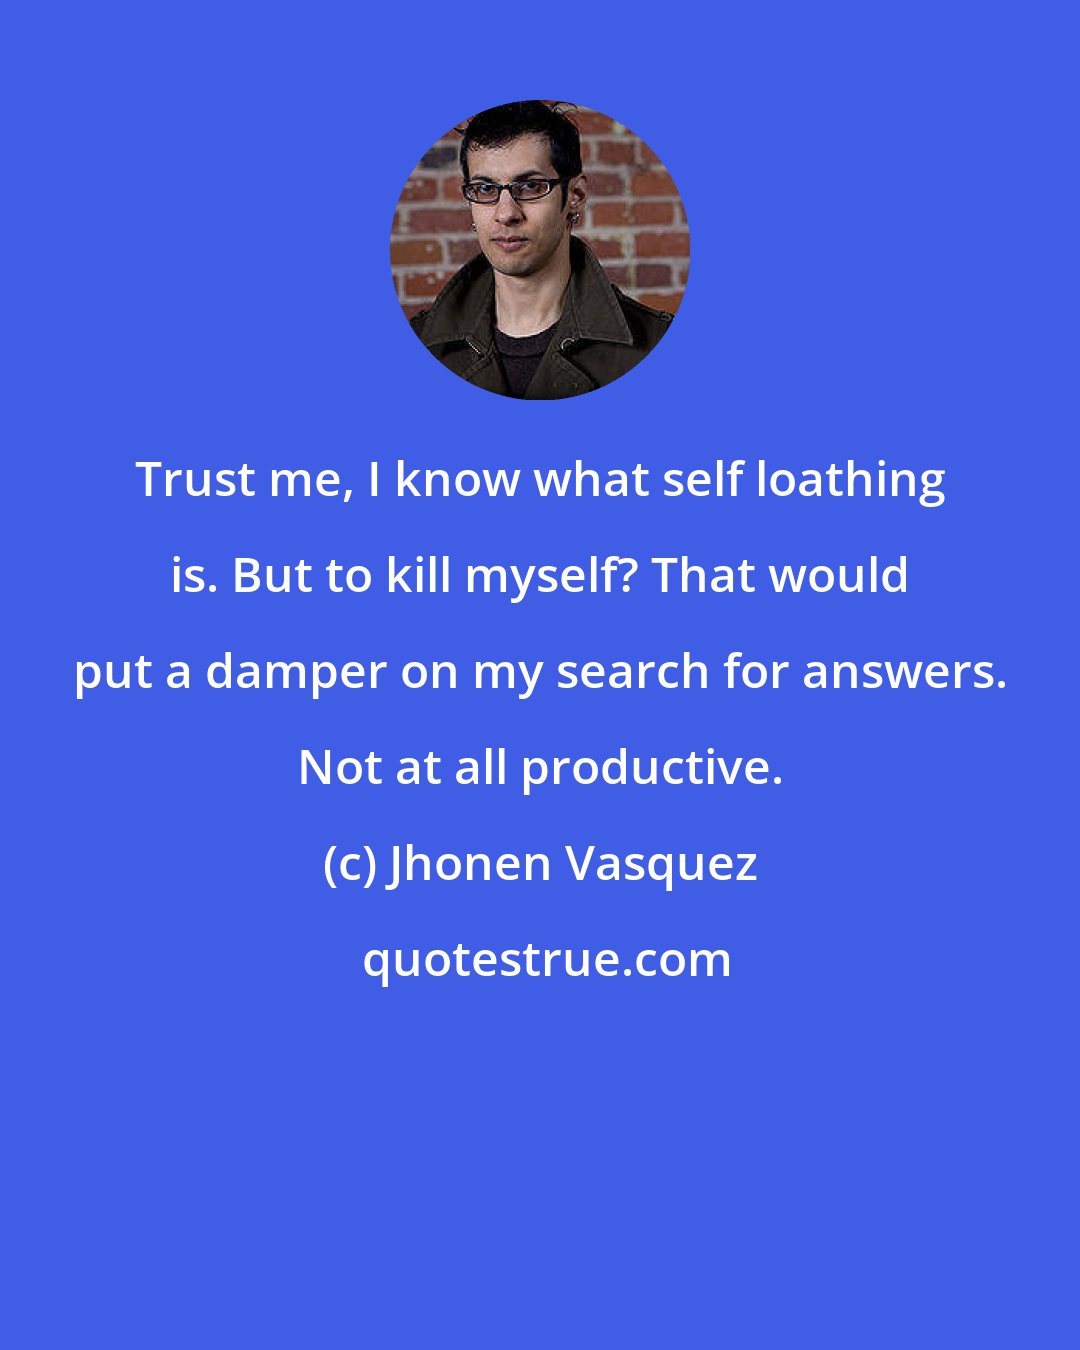 Jhonen Vasquez: Trust me, I know what self loathing is. But to kill myself? That would put a damper on my search for answers. Not at all productive.